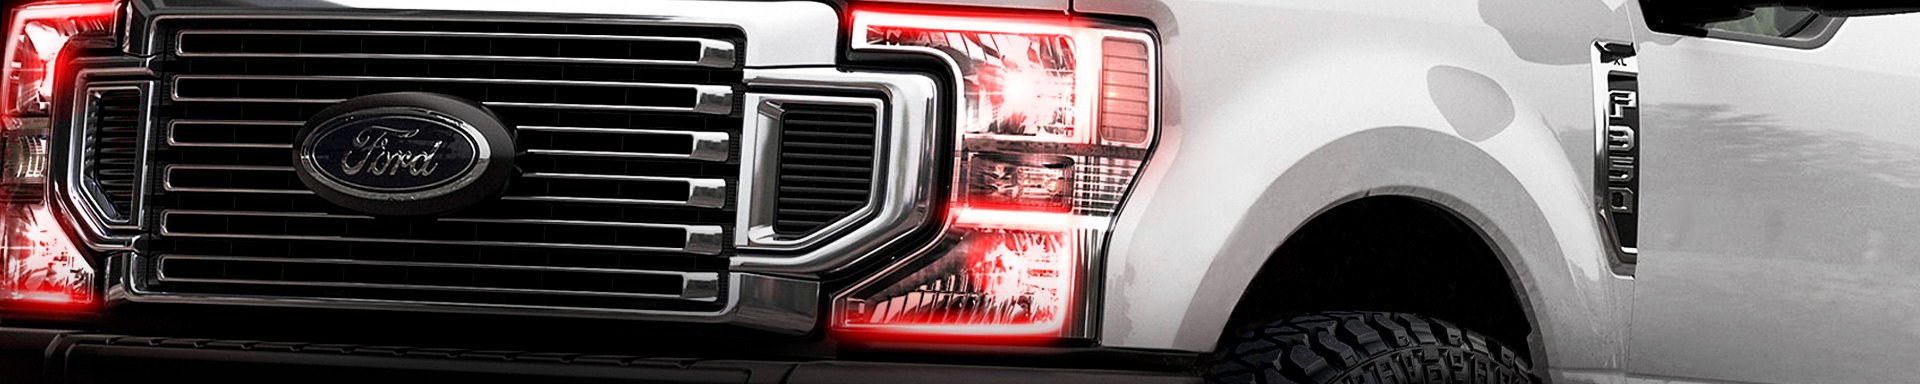 ColorSHIFT Headlight DRL Upgrade by ORACLE - Fun Way To Customize Your 2021 Ford Super Duty Truck